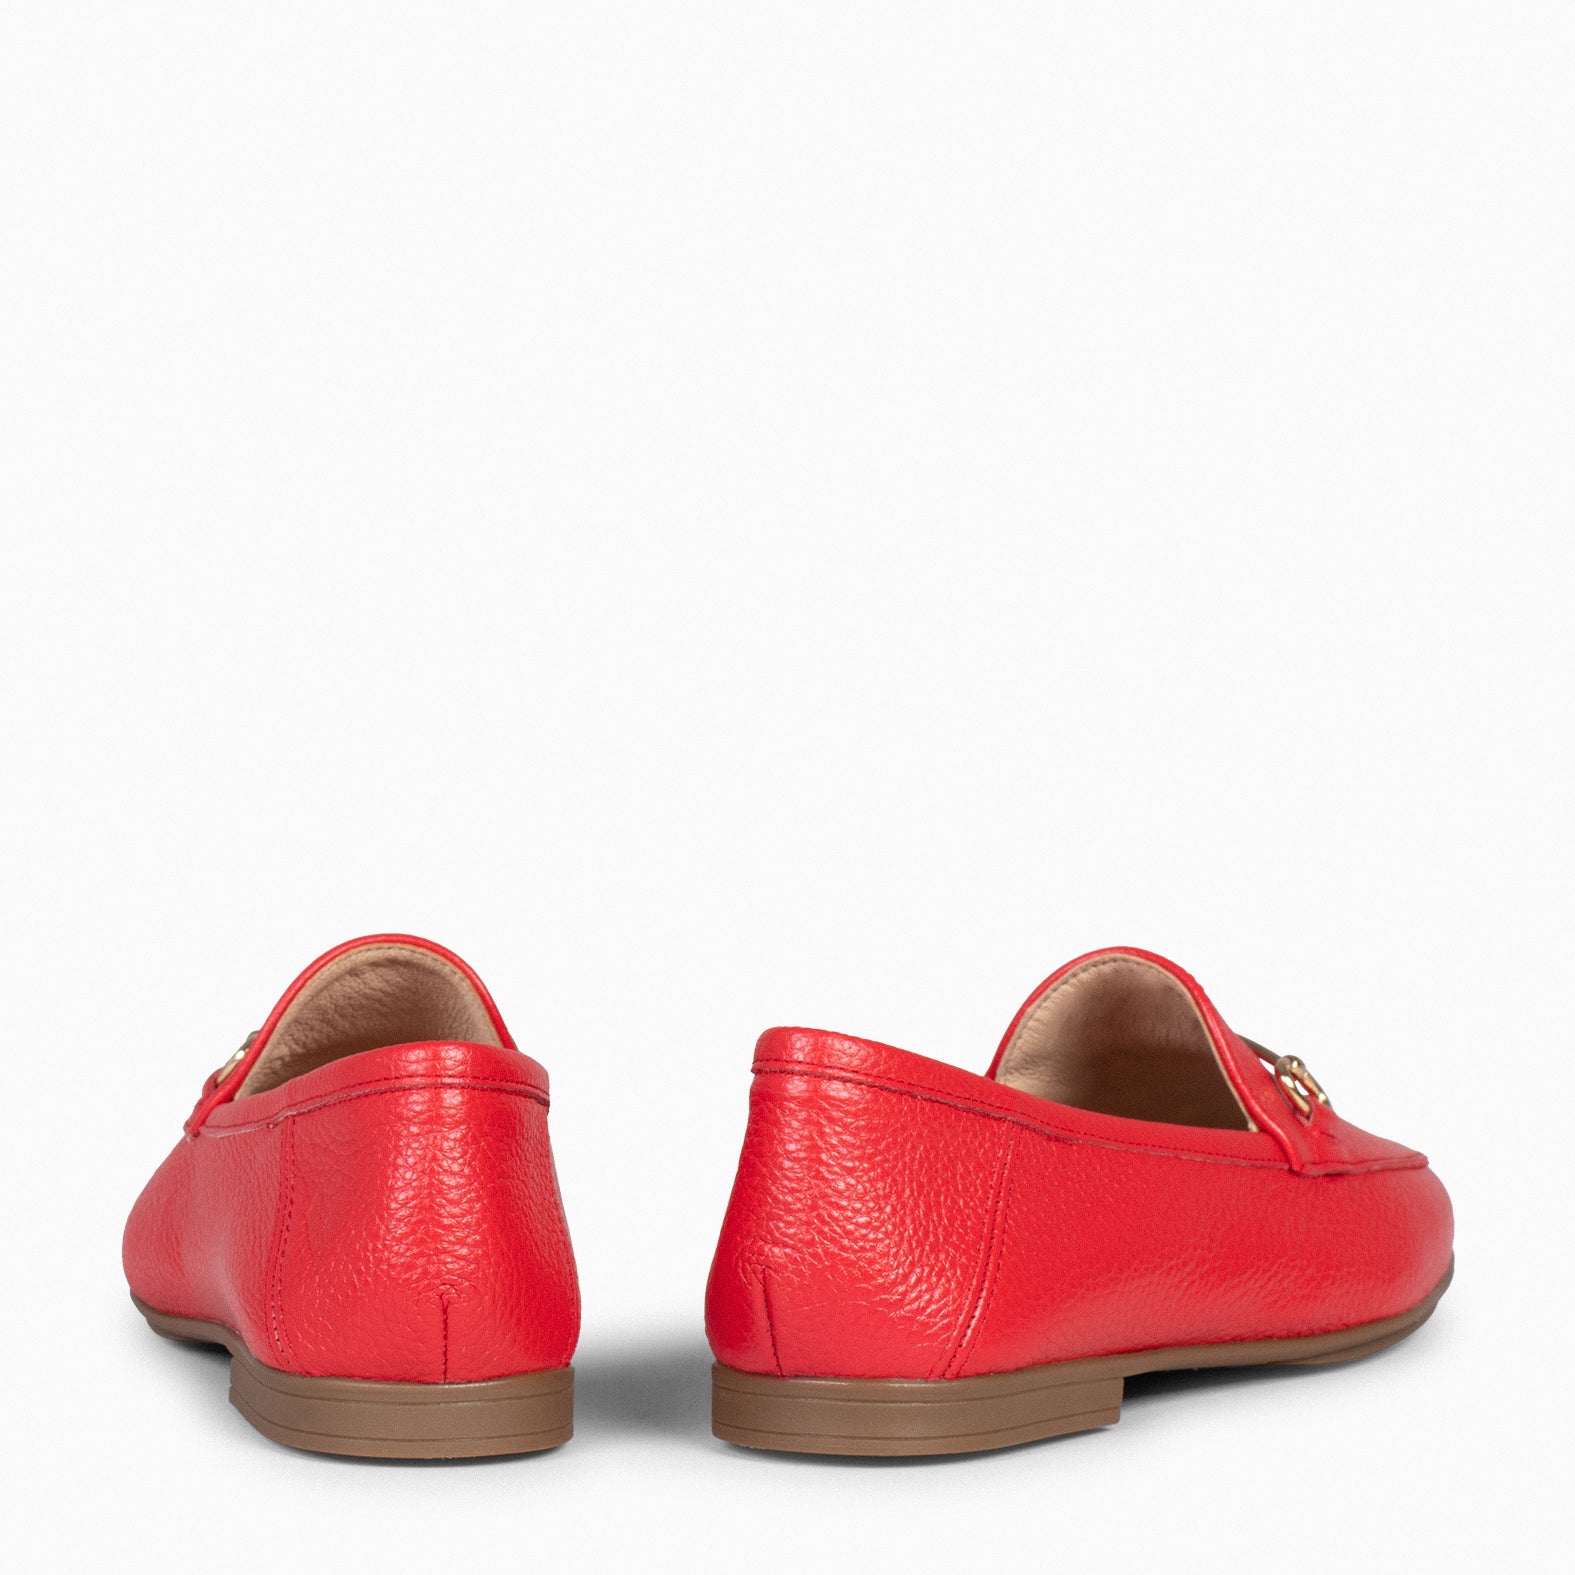 STYLE – RED moccasins with horsebit